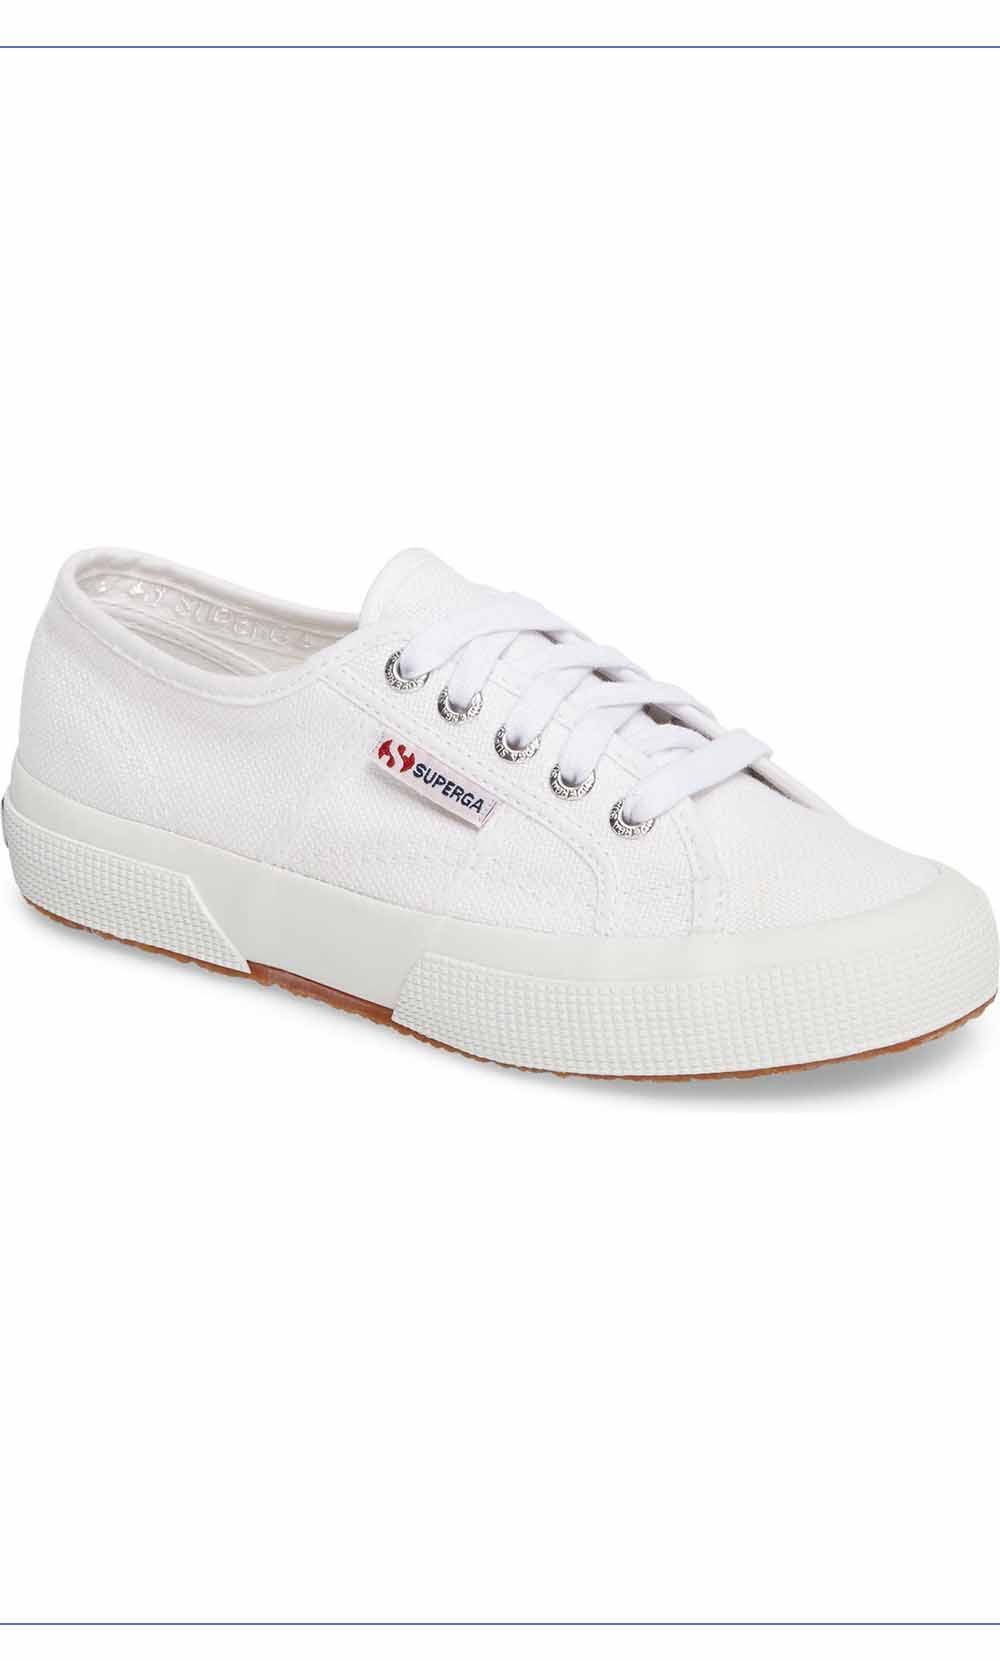 comfortable white sneakers for walking